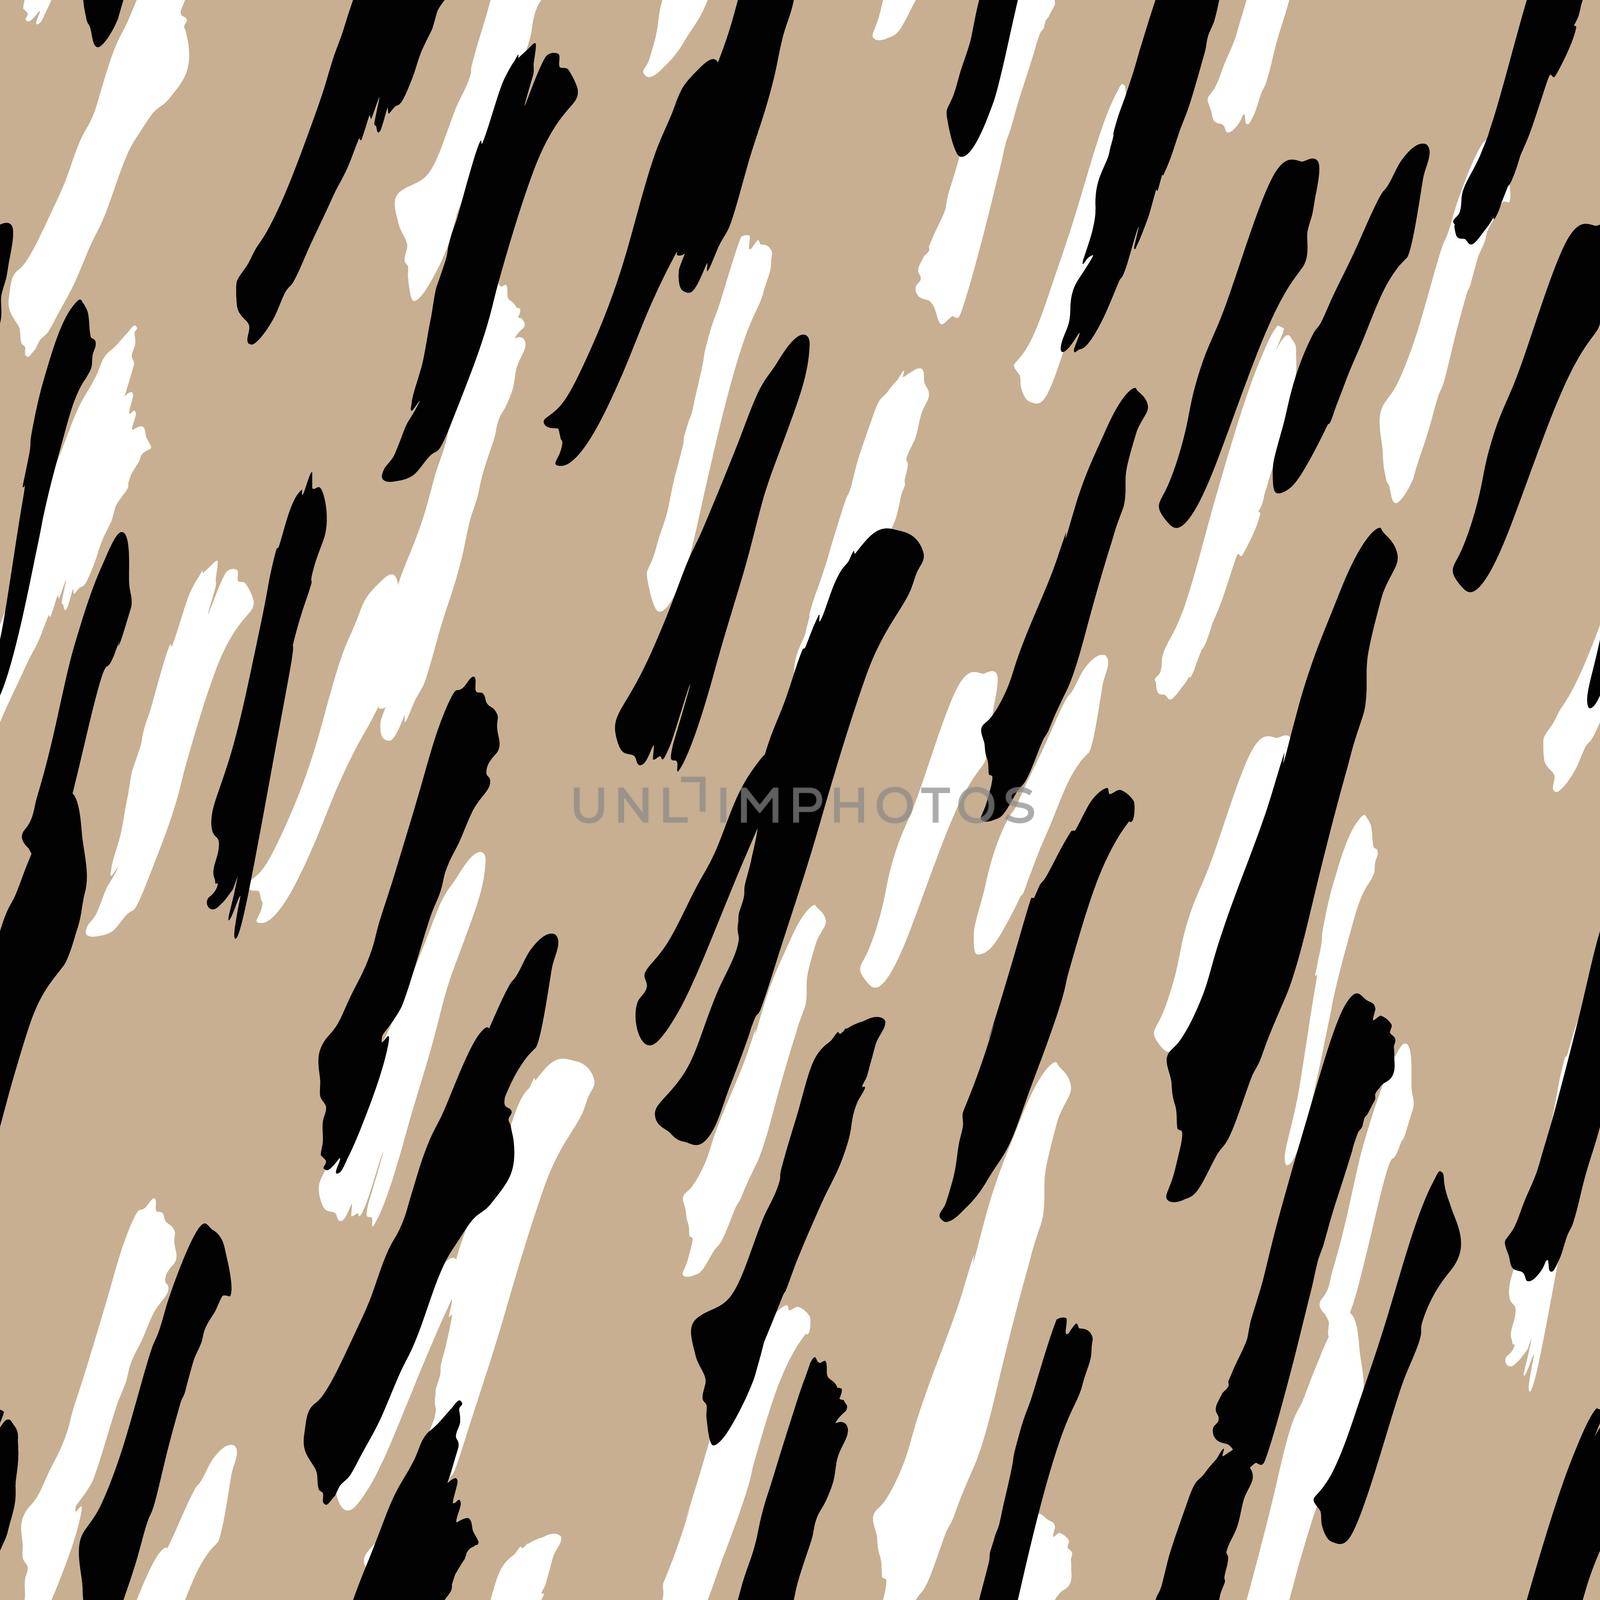 Abstract modern giraffe seamless pattern. Animals trendy background. Beige and black decorative vector stock illustration for print, card, postcard, fabric, textile. Modern ornament of stylized skin.